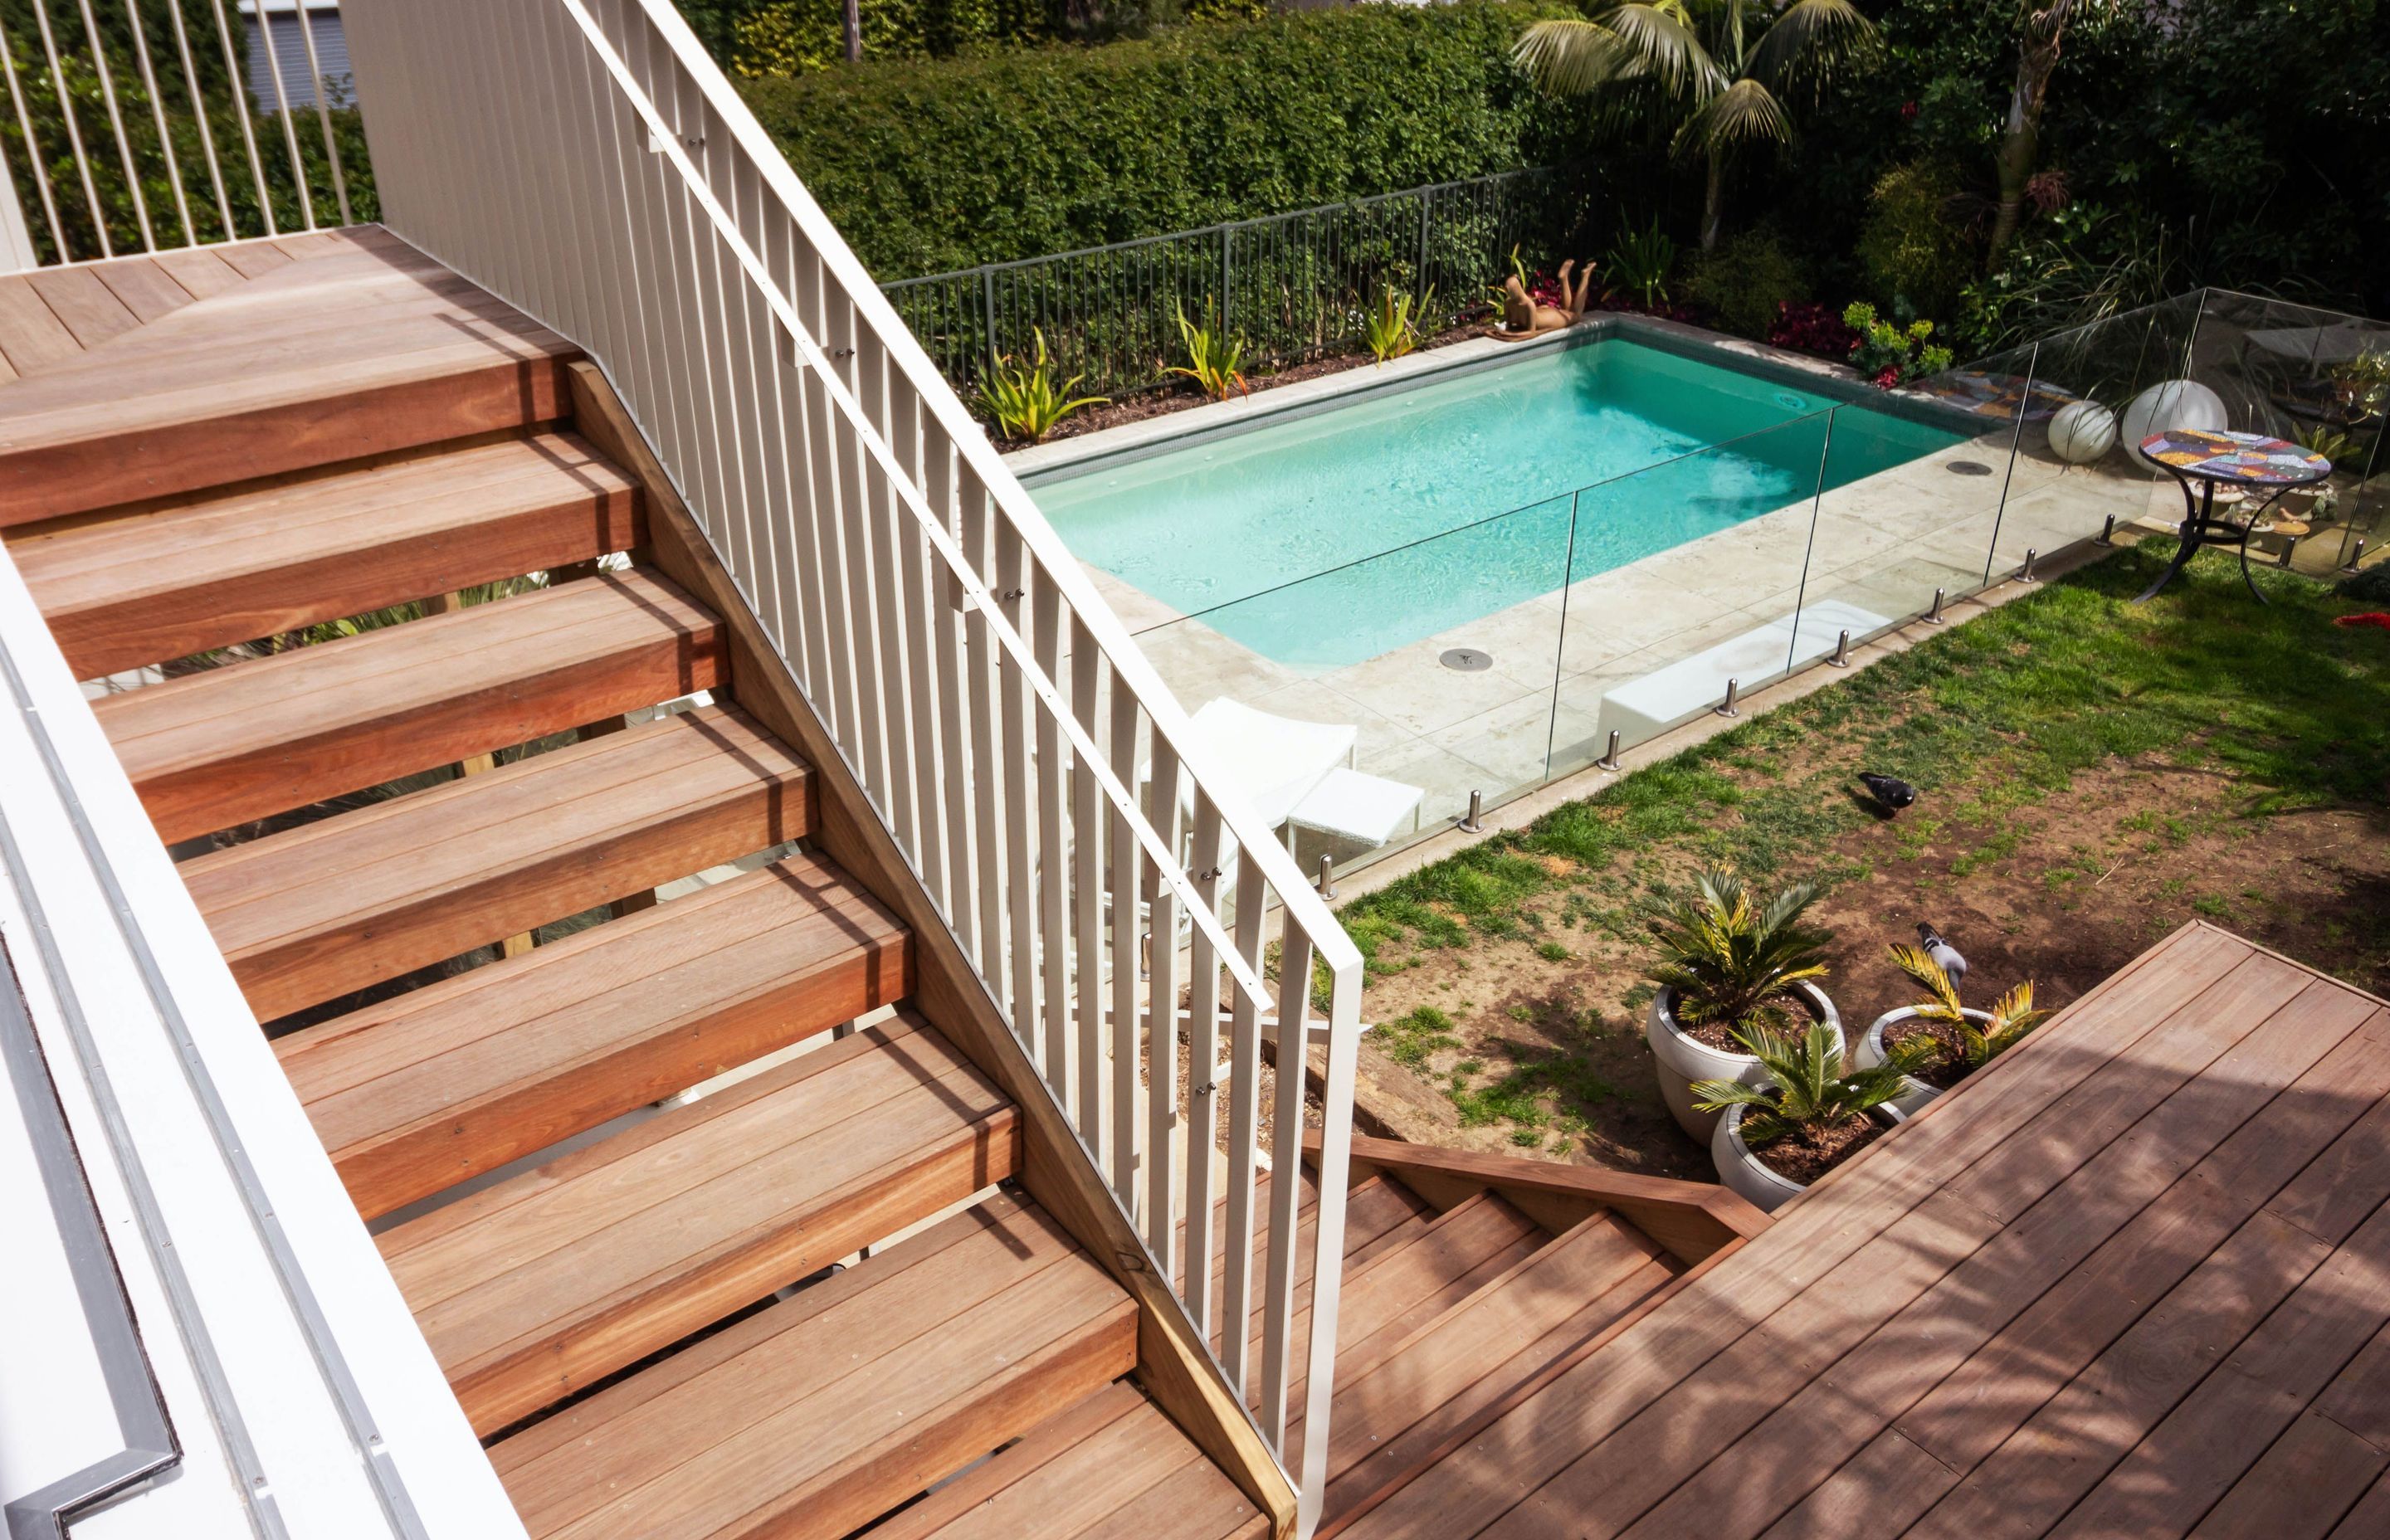 Due to inherently occurring tannins, oils, resins and other extractives found in heartwood timbers, Hurford’s Organic Decking is naturally durable and able to stand up to harsh environments and daily wear and tear.